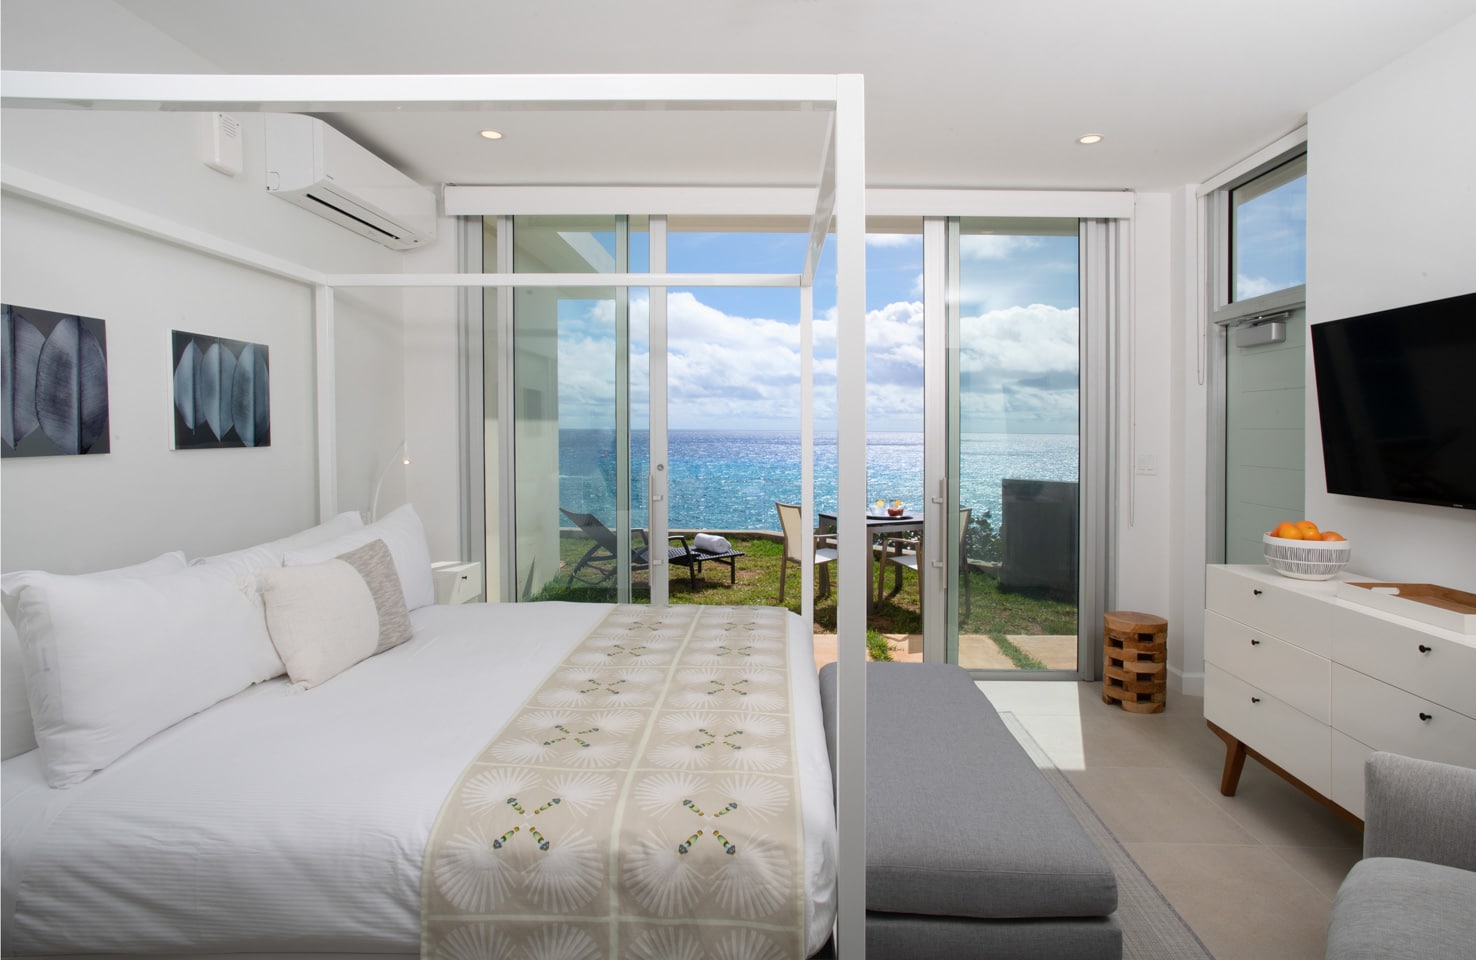 A bedroom with sliding glass doors leading to a patio overlooking the ocean.